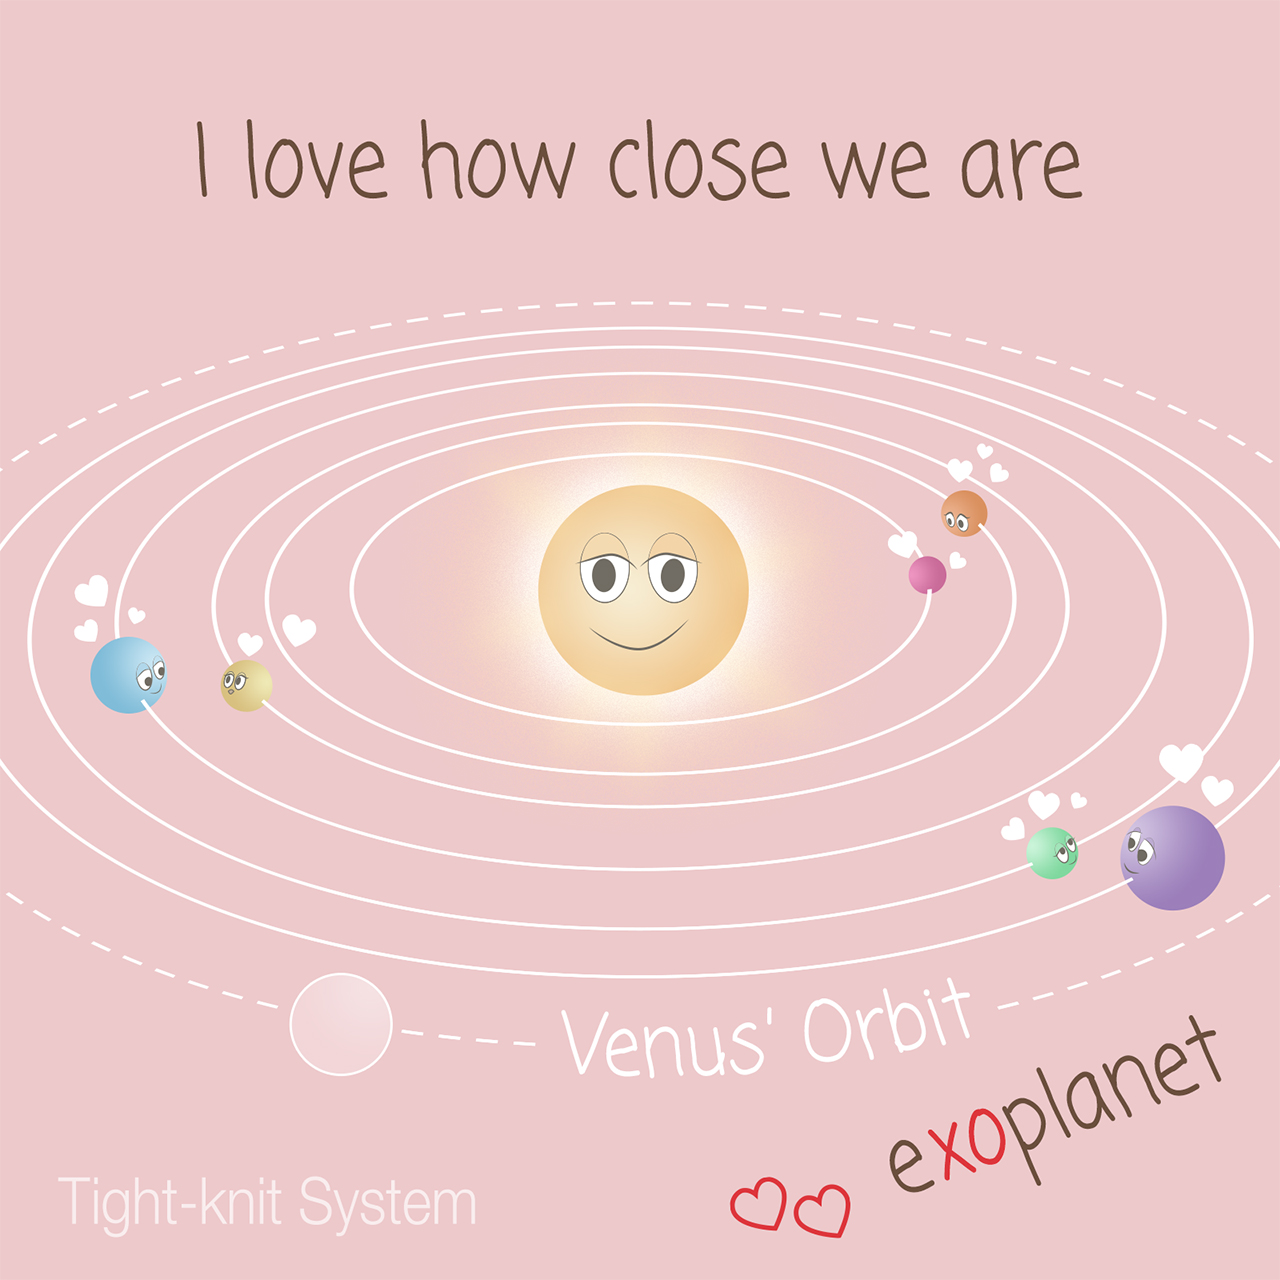 An illustration of an exoplanet Valentine.